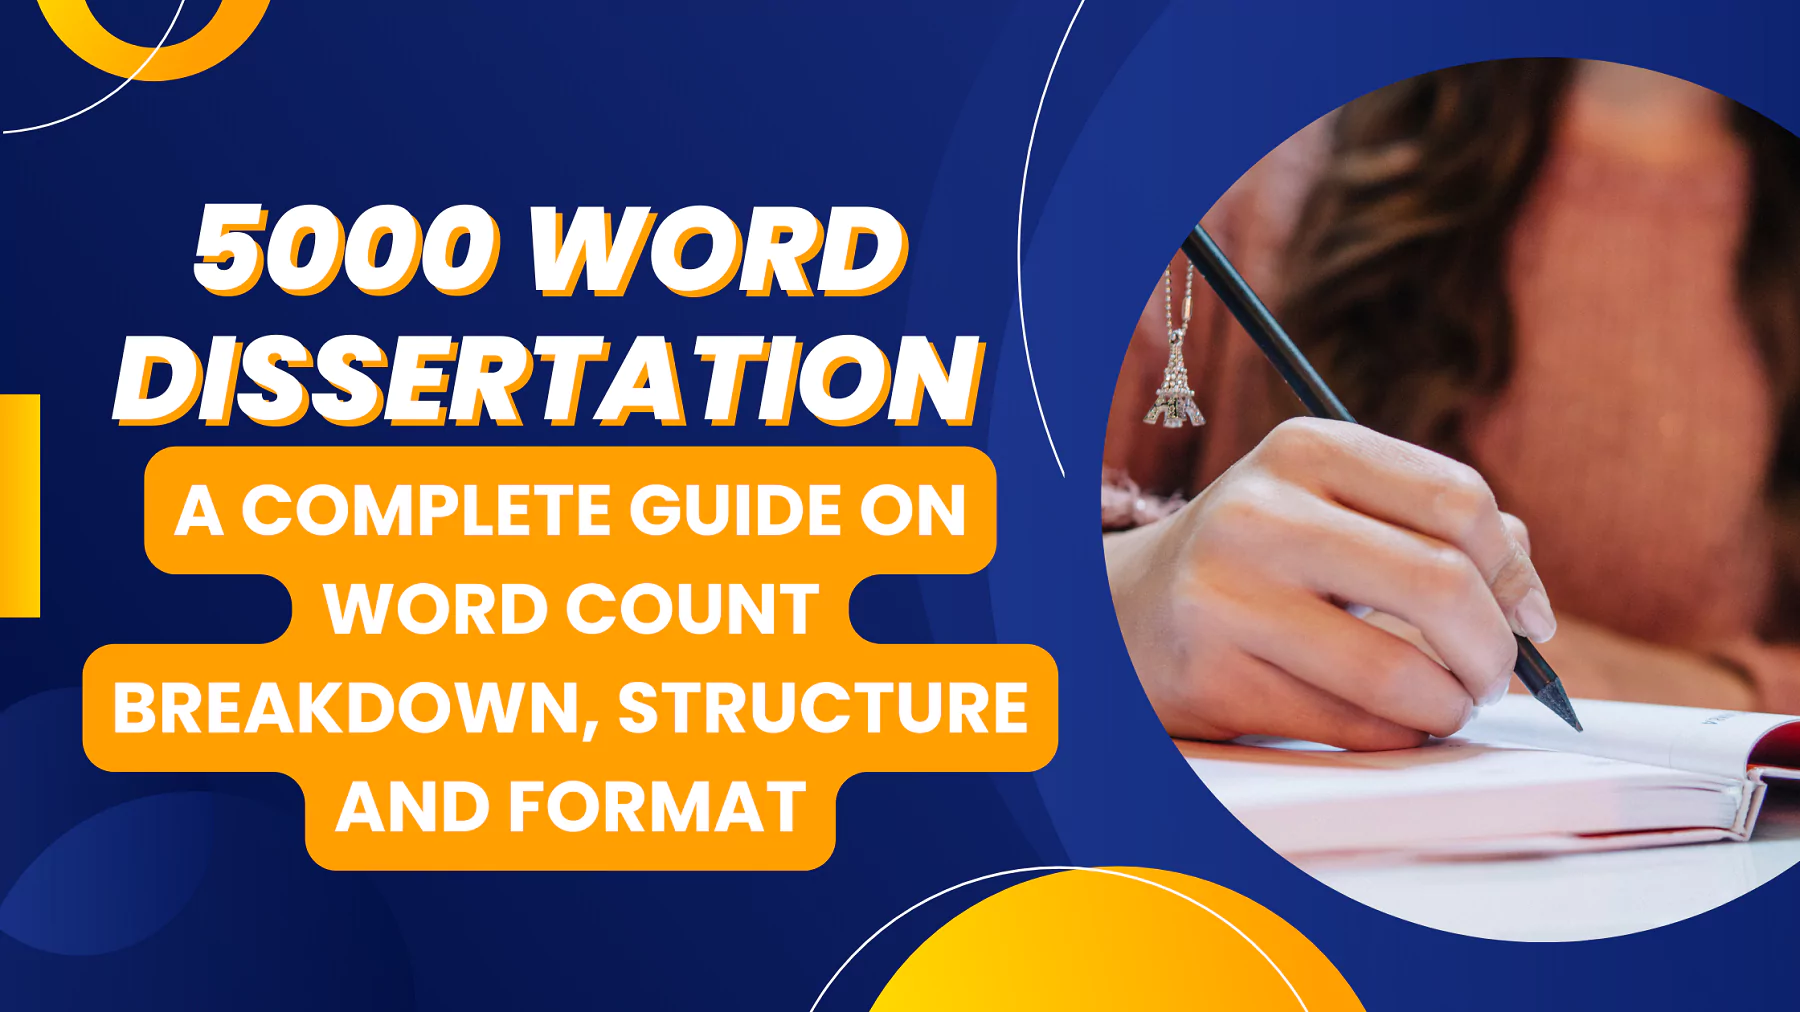 5000 Word Dissertation – A Complete Guide on Word Count Breakdown, Structure And Format